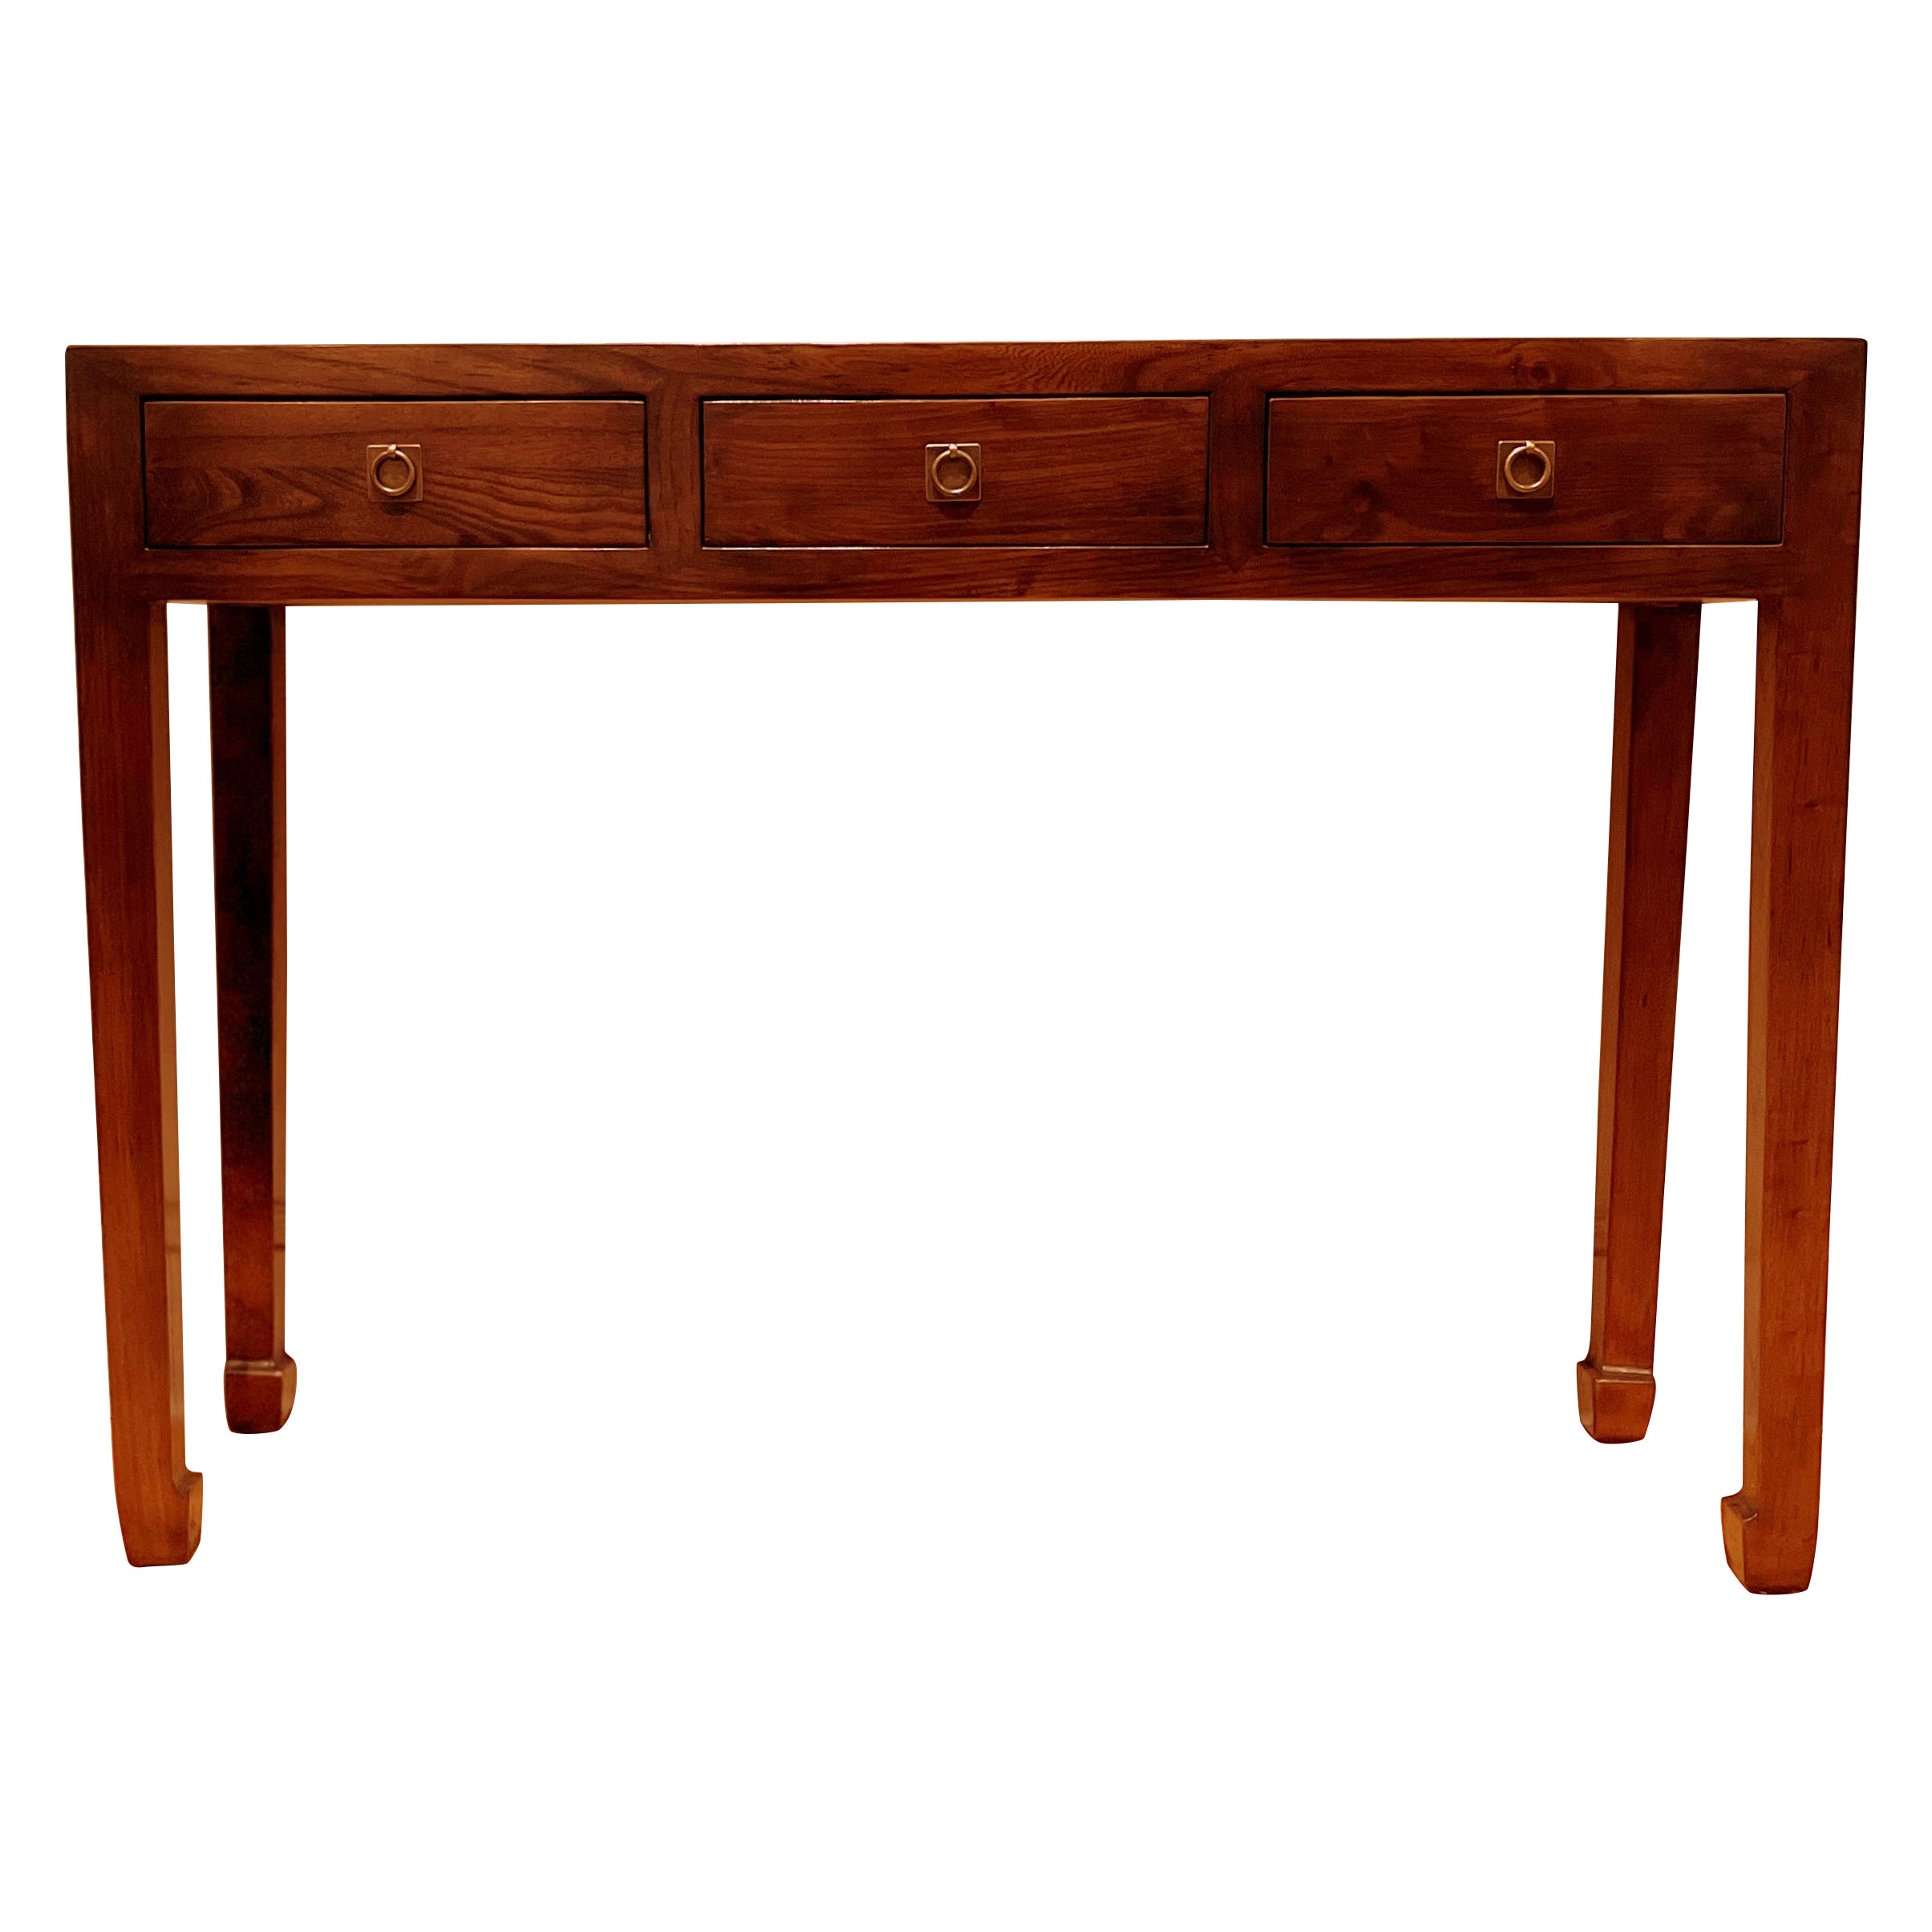 Fine Jumu Console Table with Drawers For Sale